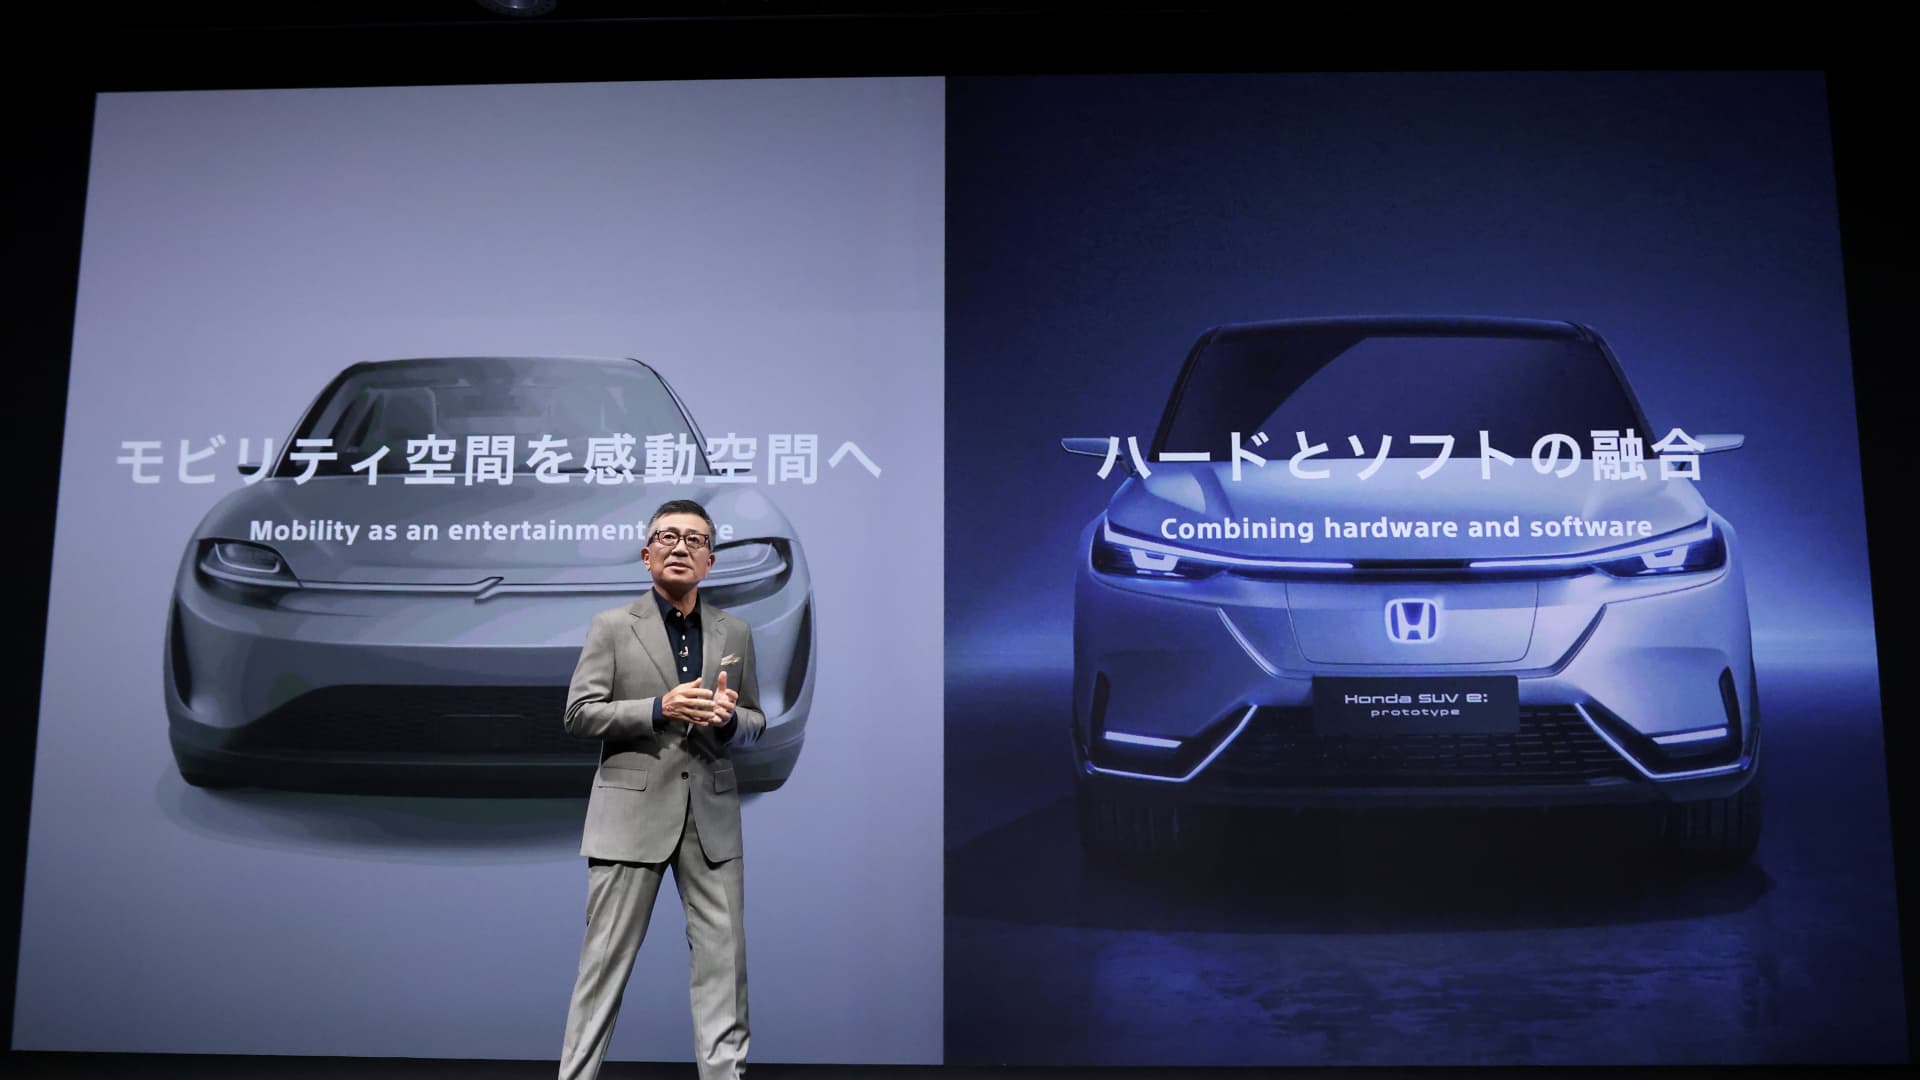 Sony and Honda plan to start U.S. deliveries of their EV in 2026